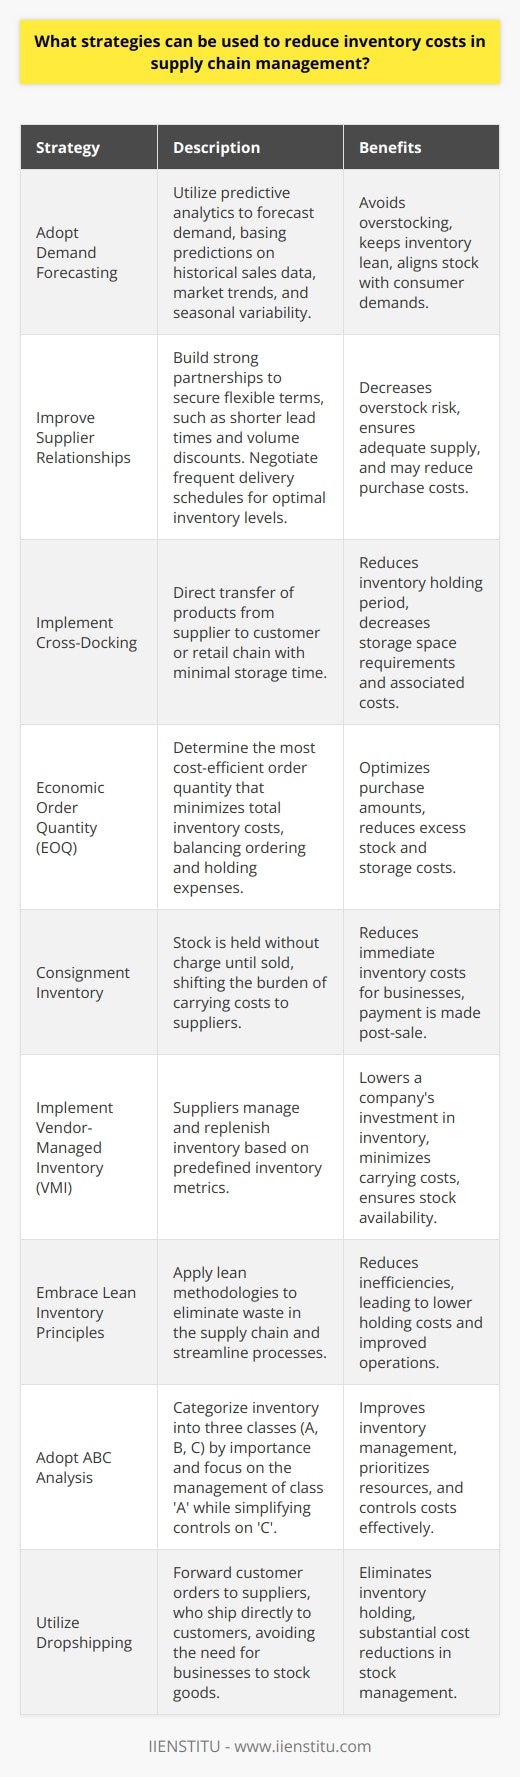 Reducing inventory costs is a critical component of efficient supply chain management. Maintaining an optimal inventory level ensures that companies can meet customer demand without carrying excessive stock that can tie up capital and increase carrying costs. Here are some strategies that supply chain managers can employ to minimize inventory expenses:1. **Adopt Demand Forecasting**:Using advanced predictive analytics to forecast demand accurately can help companies avoid overstocking. By analyzing historical sales data, market trends, and seasonal fluctuations, businesses can predict future sales and adjust inventory levels accordingly. This proactive approach supports maintaining a lean inventory that's directly aligned with consumer needs.2. **Improve Supplier Relationships**:Building strong relationships with suppliers can facilitate more flexible terms, such as shorter lead times and volume discounts. Negotiate terms that allow for smaller, more frequent deliveries to keep inventory at optimal levels. This practice can reduce the risk of overstocking while ensuring adequate supplies for production or sales.3. **Implement Cross-Docking**:Cross-docking is a logistics procedure where products received from a supplier or manufacturing plant are distributed directly to customers or retail chains with minimal to no storage time. This strategy reduces the need to hold large amounts of inventory, subsequently reducing storage space and inventory holding costs.4. **Economic Order Quantity (EOQ)**:The EOQ model allows businesses to determine the ideal order quantity that minimizes the total cost of inventory—including the costs of ordering and holding stock. Calculating EOQ can optimize the amount of inventory procured, reducing unnecessary spending on excess stock and storage.5. **Consignment Inventory**:Consignment inventory is an arrangement where inventory is paid for only when it is sold. This shifts the inventory carrying costs to the suppliers until the inventory is used or sold, effectively reducing inventory costs for the business that holds the consigned stock.6. **Implement Vendor-Managed Inventory (VMI)**:A vendor-managed inventory system involves suppliers taking on the responsibility for managing and replenishing inventory as needed. This can reduce a company's investment in inventory and lower carrying costs as suppliers will manage stock levels based on agreed-upon inventory metrics.7. **Embrace Lean Inventory Principles**:Adopting lean principles can help identify waste within the supply chain. By continuously reviewing processes and eliminating inefficiencies—such as excess movement, waiting time, or over-processing—businesses can streamline operations and thereby reduce inventory holding costs.8. **Adopt ABC Analysis**:Also known as selective inventory control, ABC analysis categorizes inventory into three categories (A, B, and C) based on their importance. 'A' items are the most valuable, while 'C' items are the least. By focusing more resources on managing 'A' items and applying simpler controls to 'C' items, companies can optimize their inventory management efforts and costs.9. **Utilize Dropshipping**:Dropshipping allows businesses to transfer customer orders and shipment details directly to manufacturers or wholesalers, who then ship the goods directly to the customer. This model eliminates the need for businesses to keep goods in stock, reducing their inventory costs substantially.Integrating these strategies requires a commitment to continuous improvement and openness to innovative supply chain practices. With the right approach, businesses can achieve a balanced inventory that satisfies customer demand while minimizing the costs associated with inventory management. Engaging tools and training such as those offered by institutions like IIENSTITU can aid in enhancing the efficiency and capacity of supply chain professionals to implement these cost-saving measures effectively.